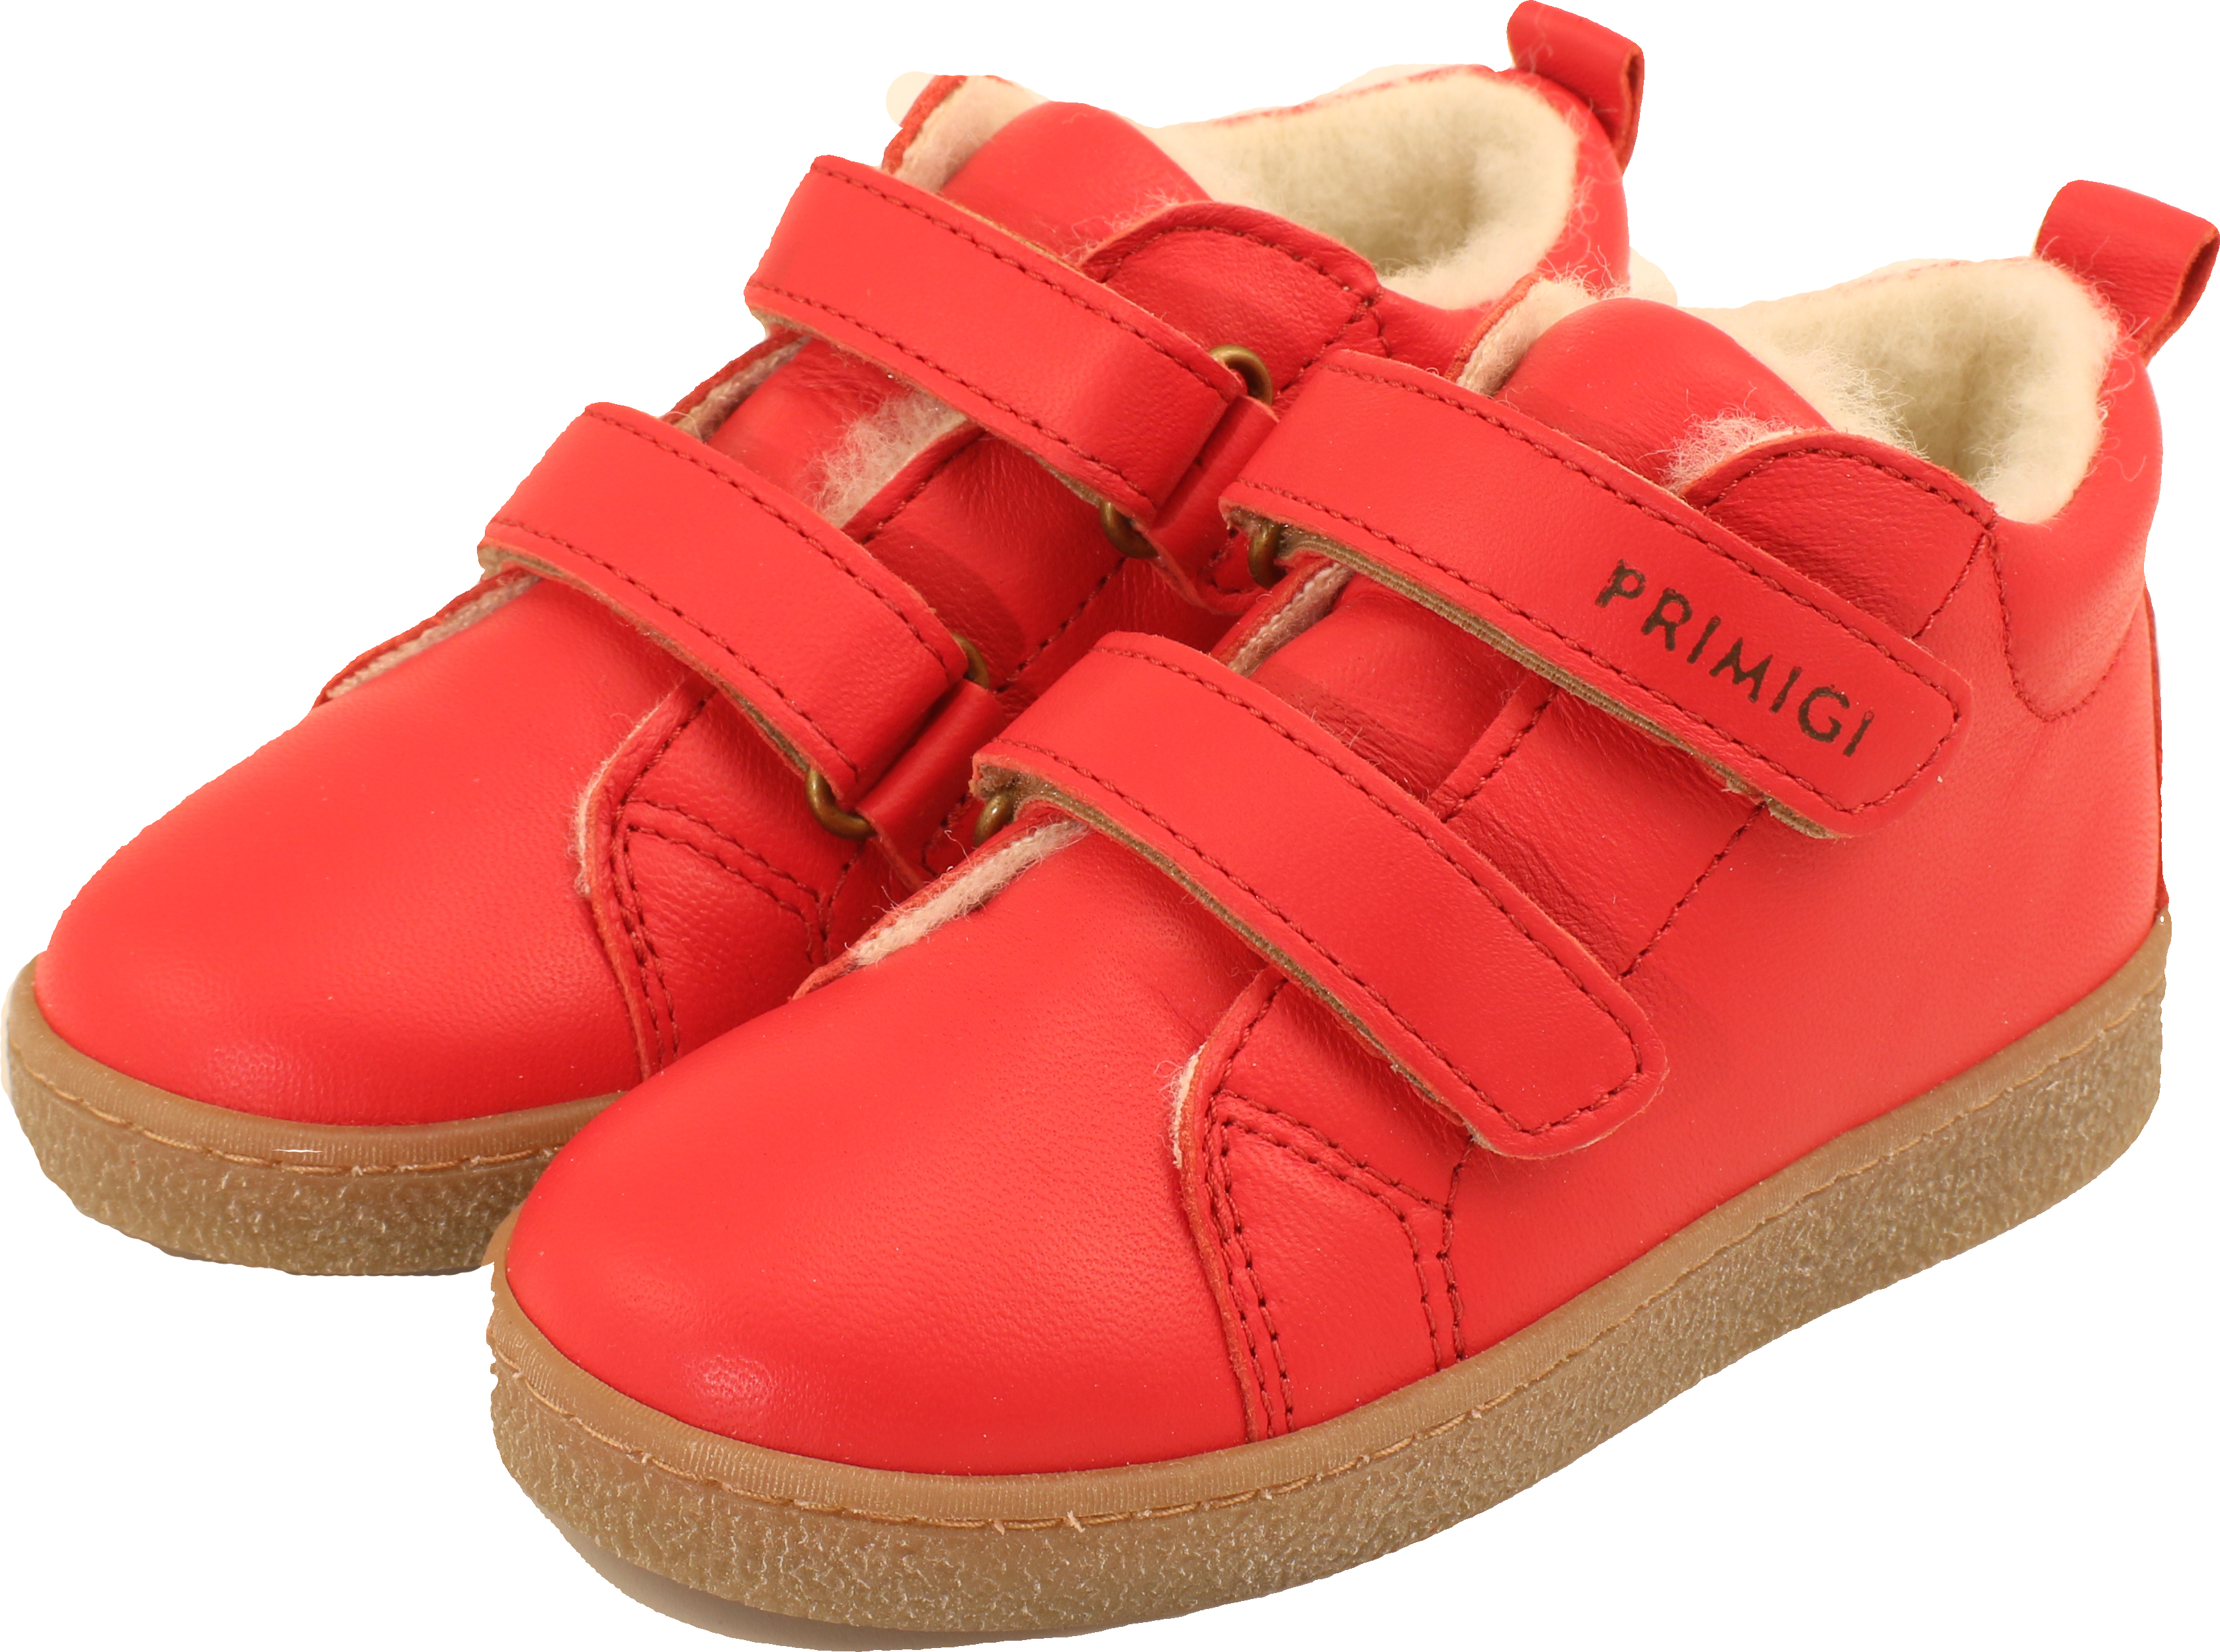 Phm 84180 - Red Leather